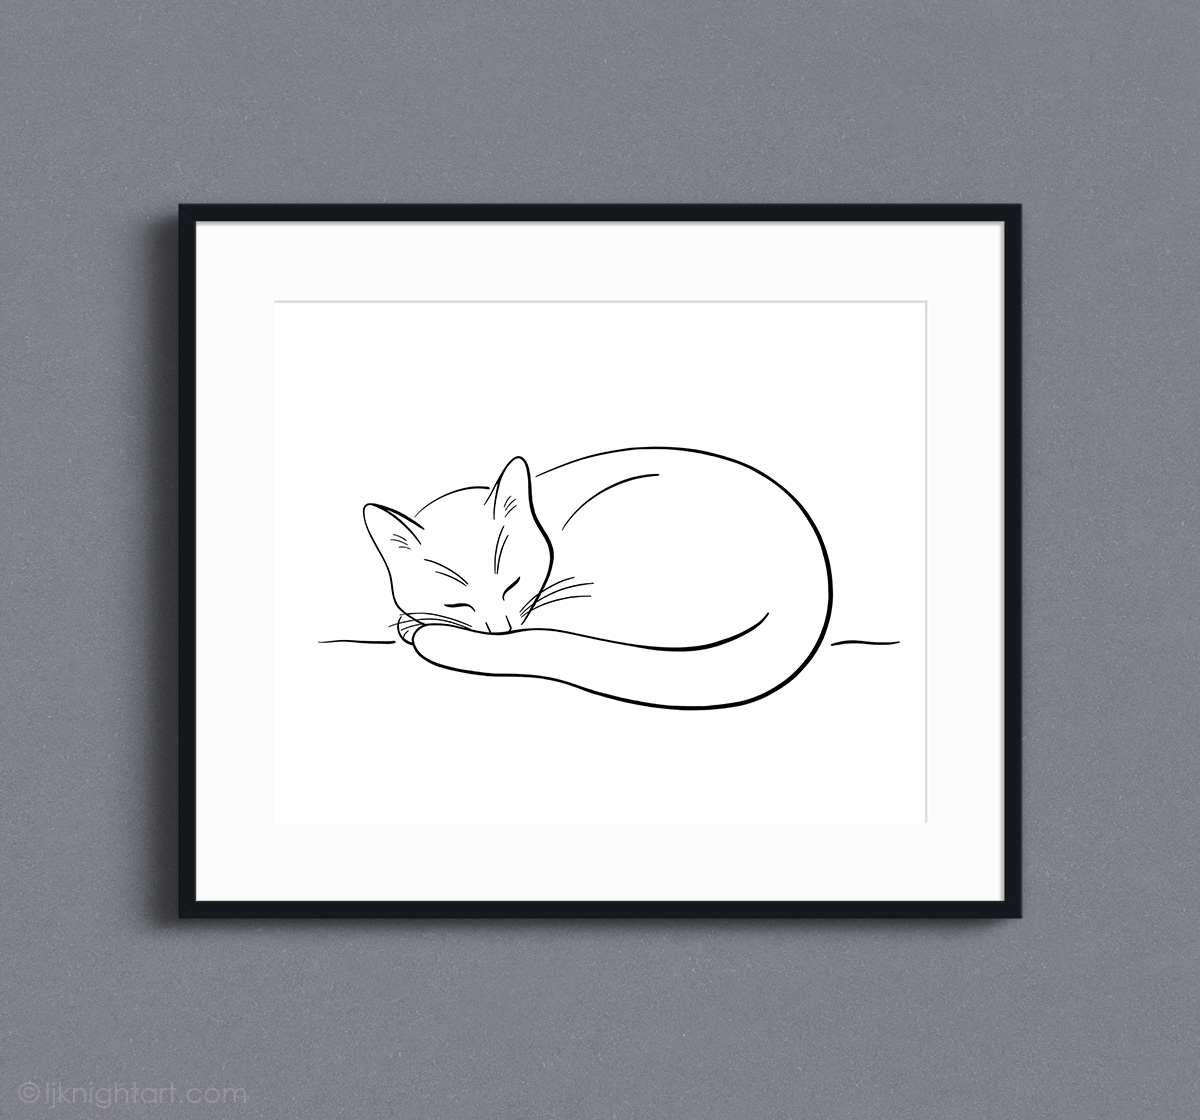 How to Draw a Cat | Easy Drawing Tutorial | Design Bundles